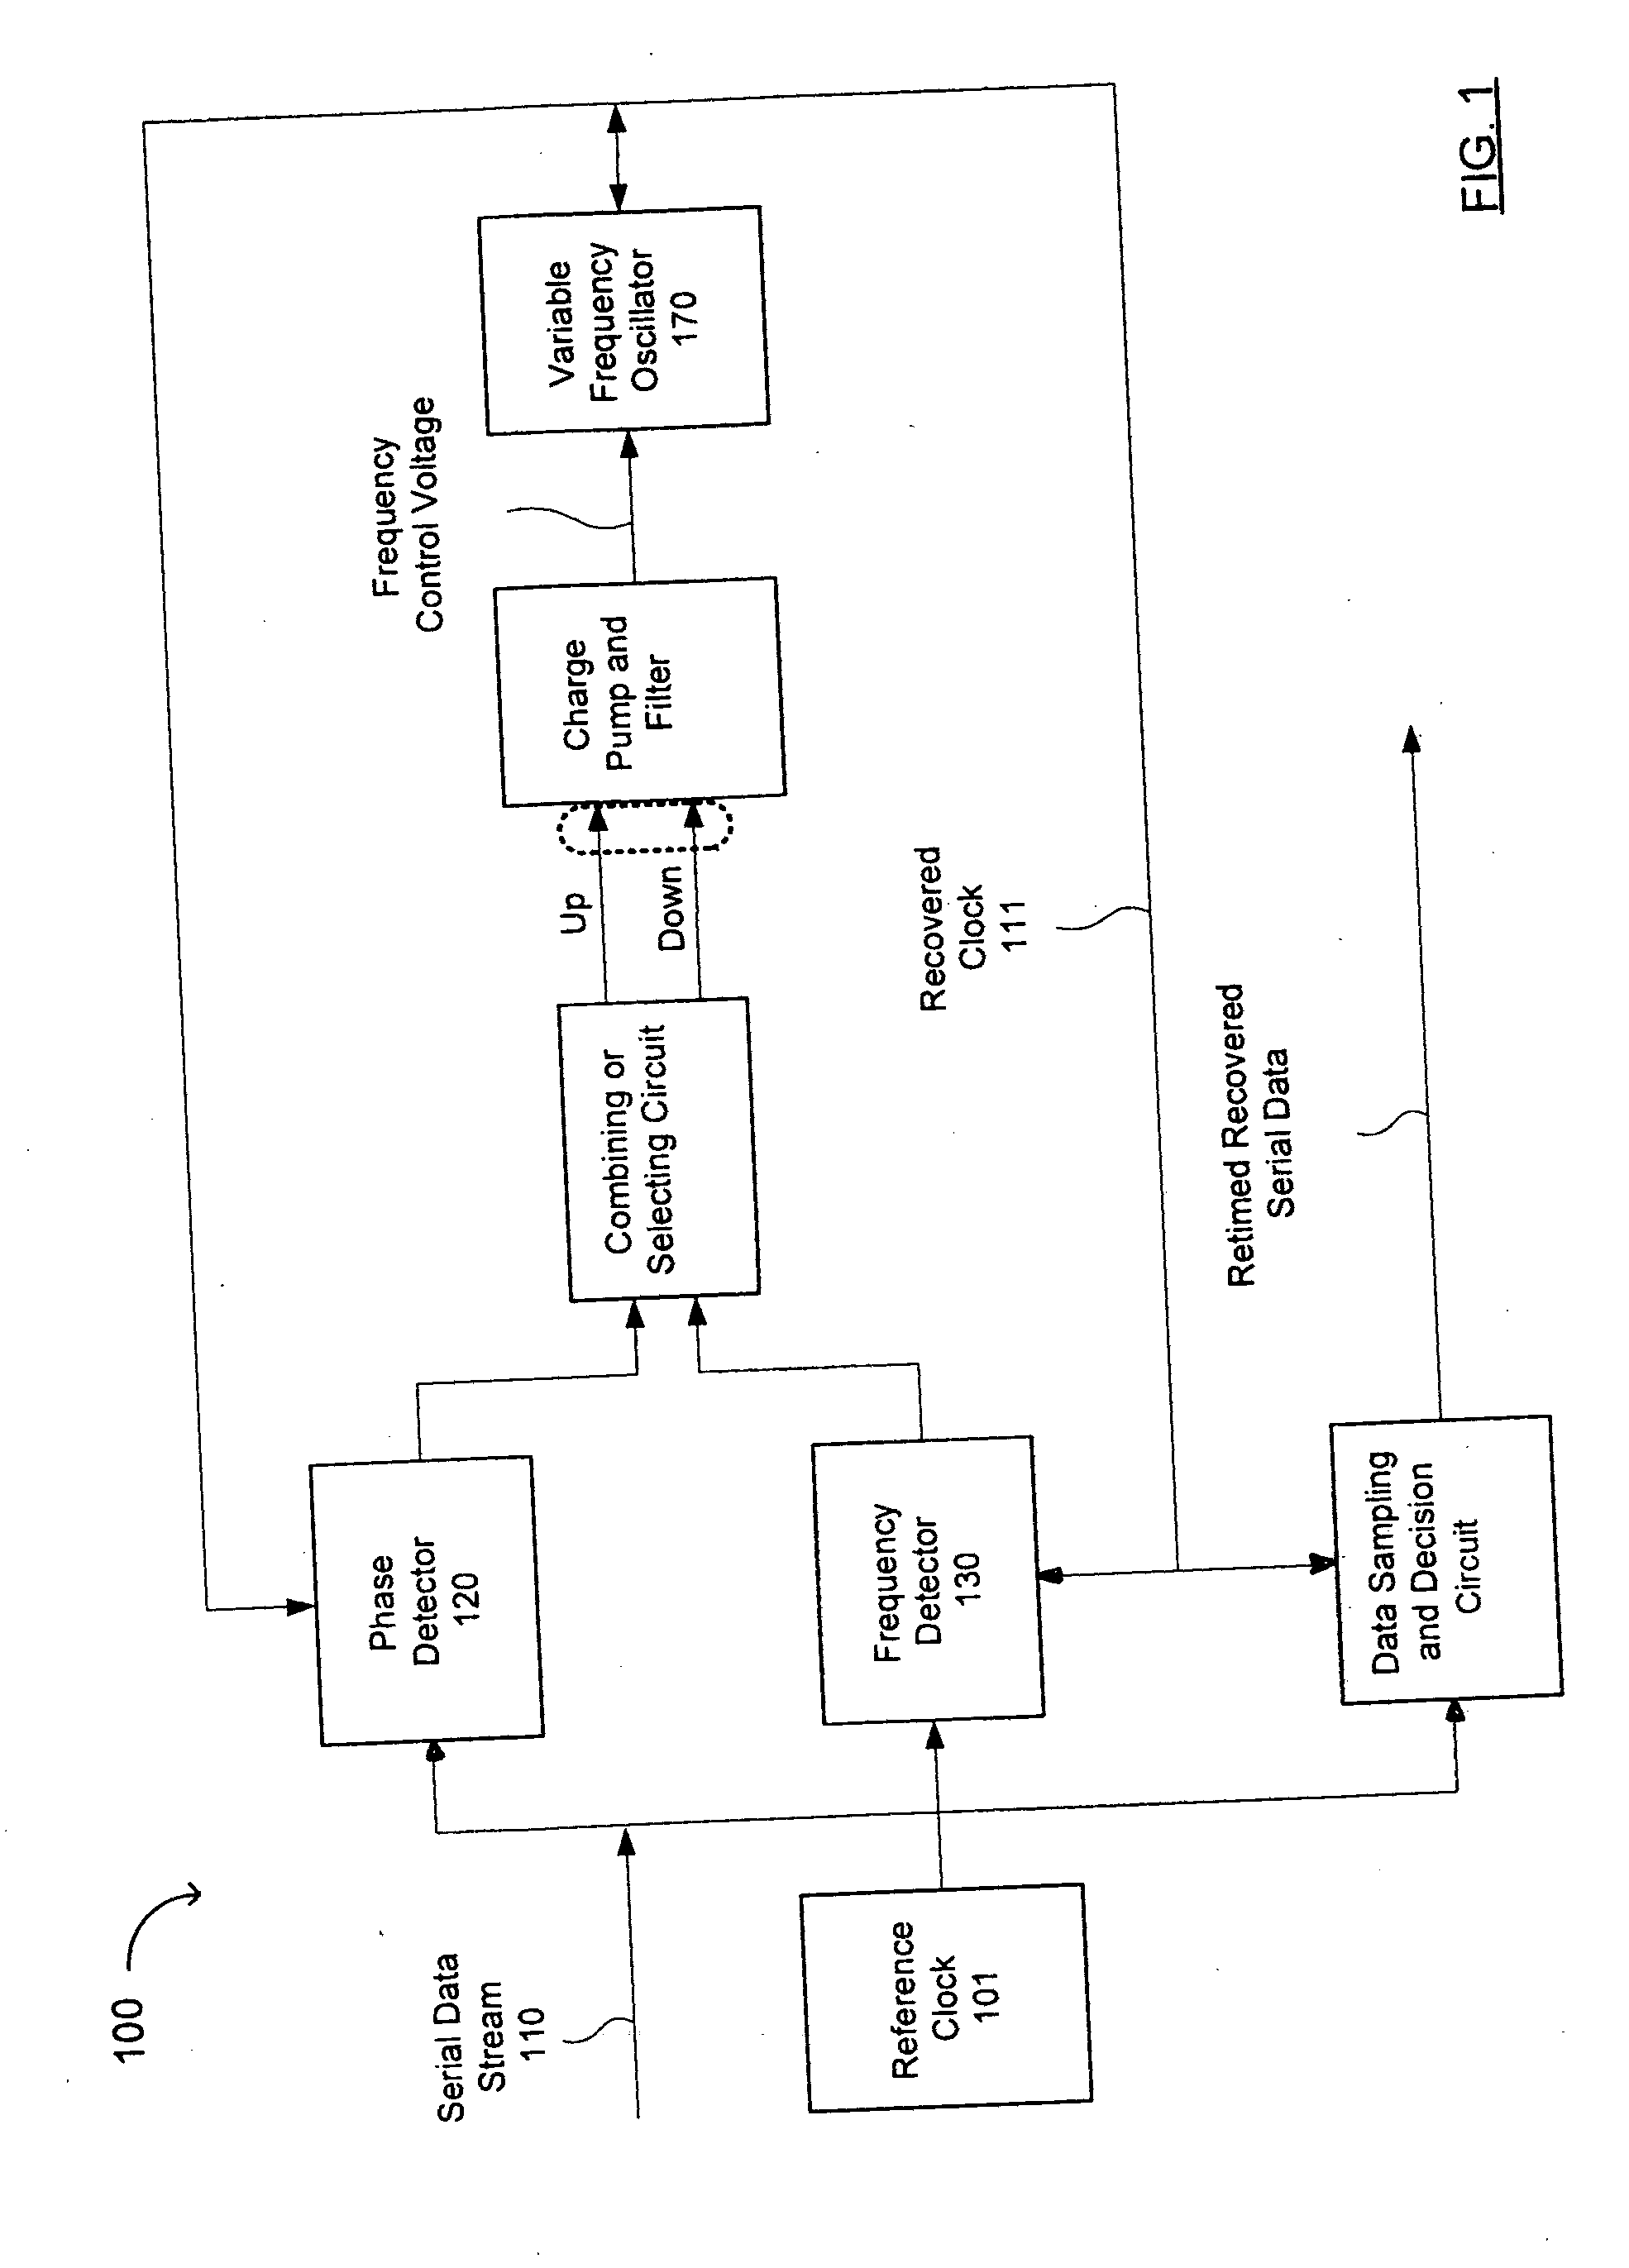 Circuits and methods for acquiring a frequency of a data bitstream